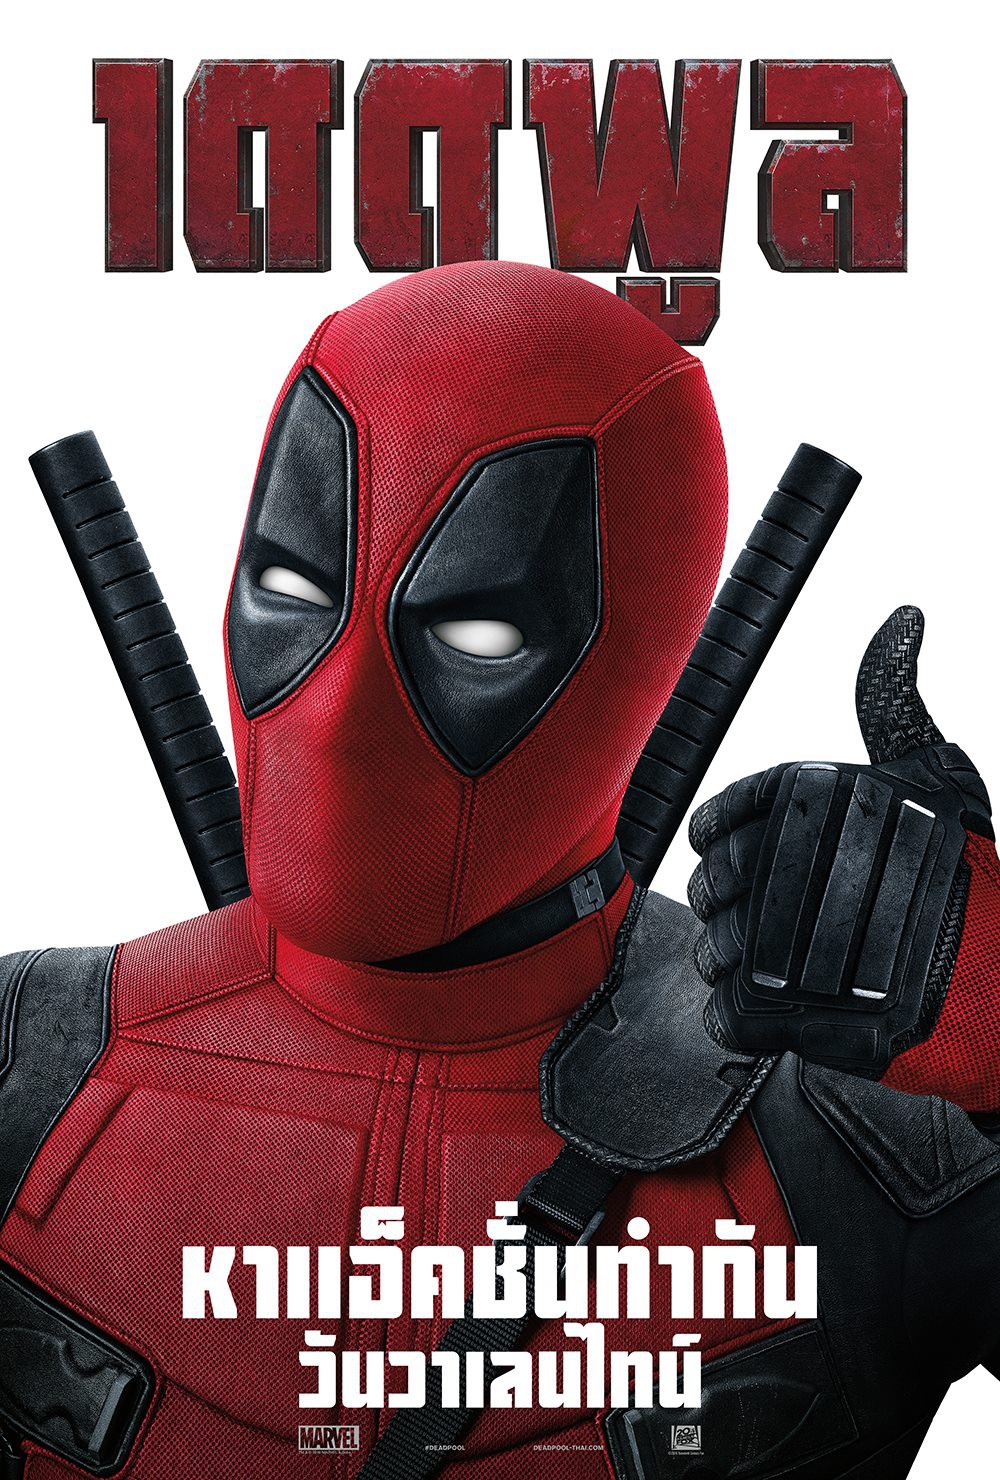 Extra Large Movie Poster Image for Deadpool (#15 of 15)